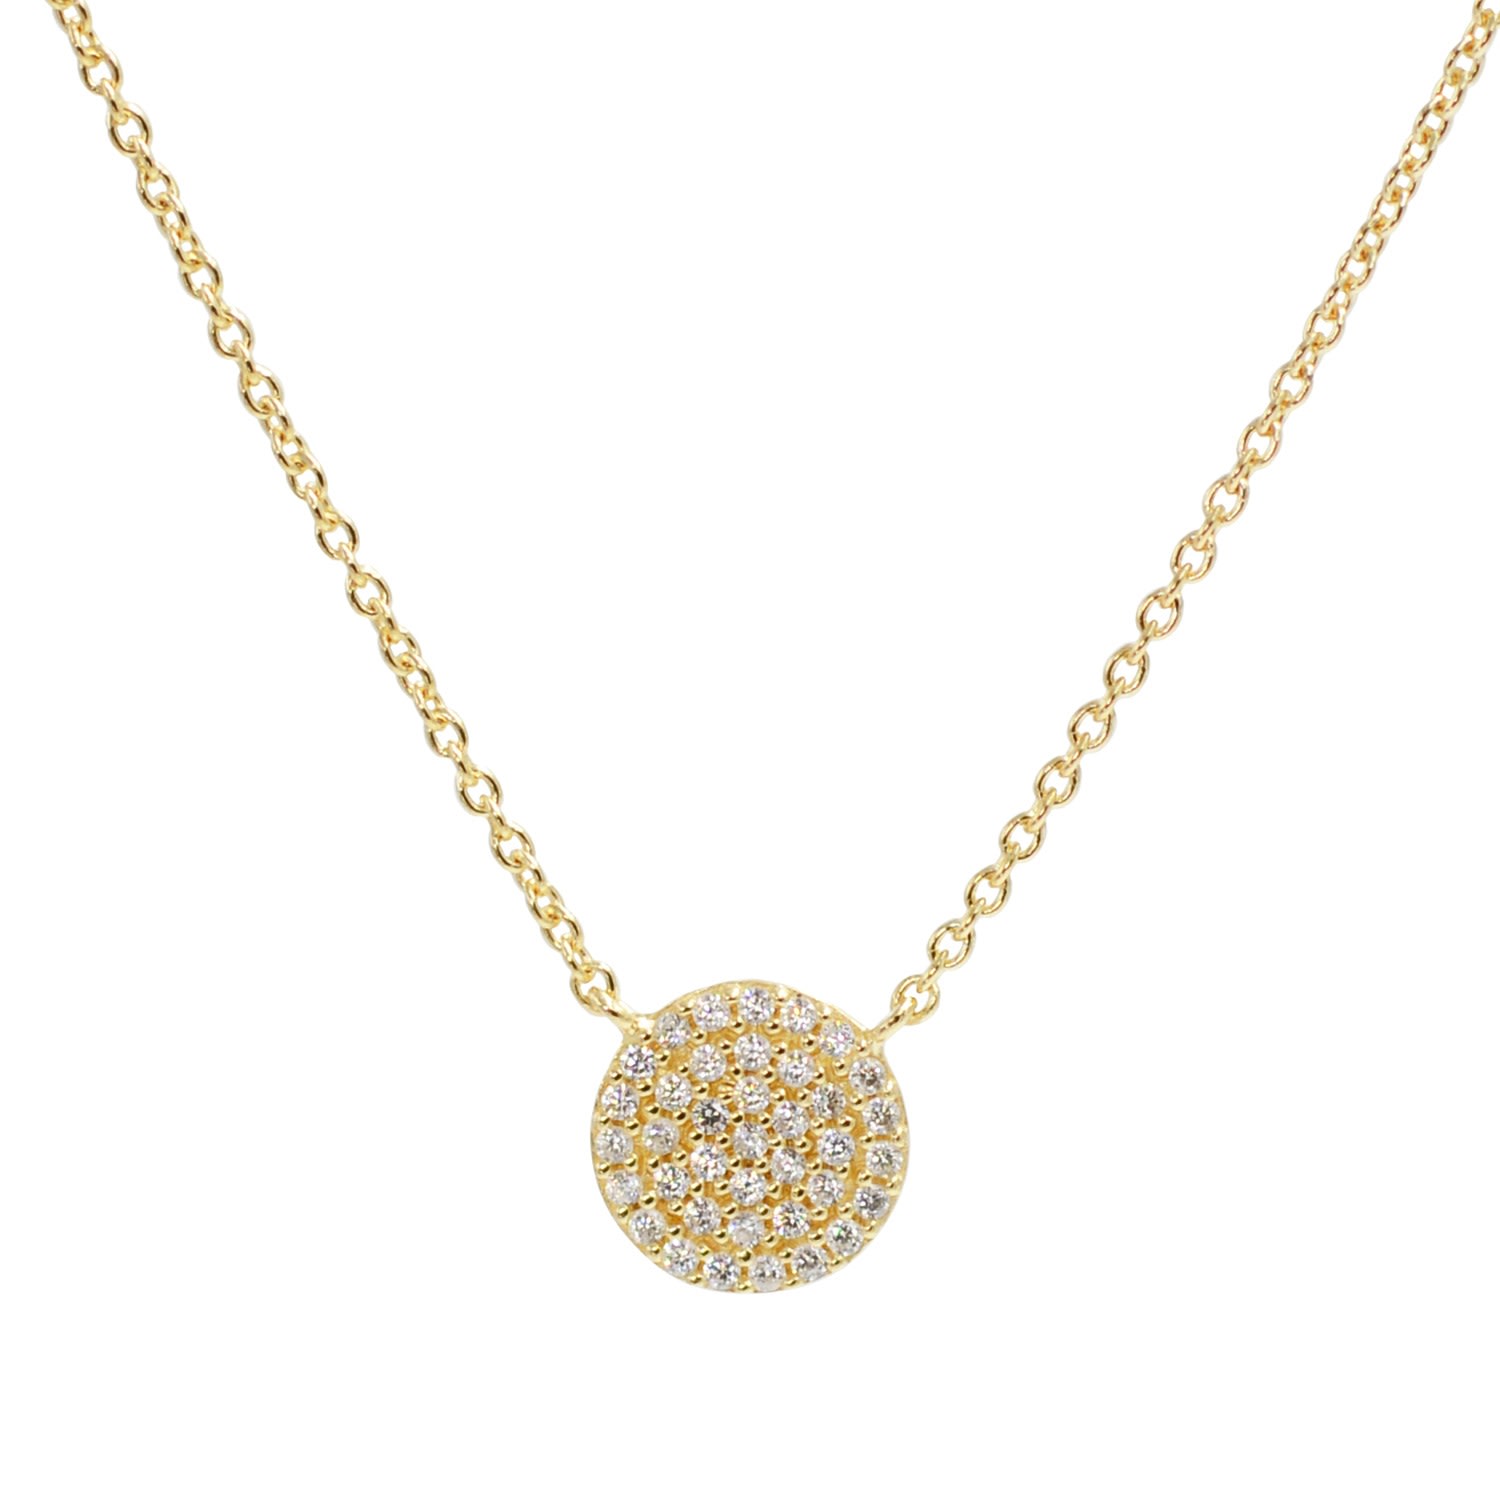 Women’s Gold Pave Disk With Crystals Kamaria